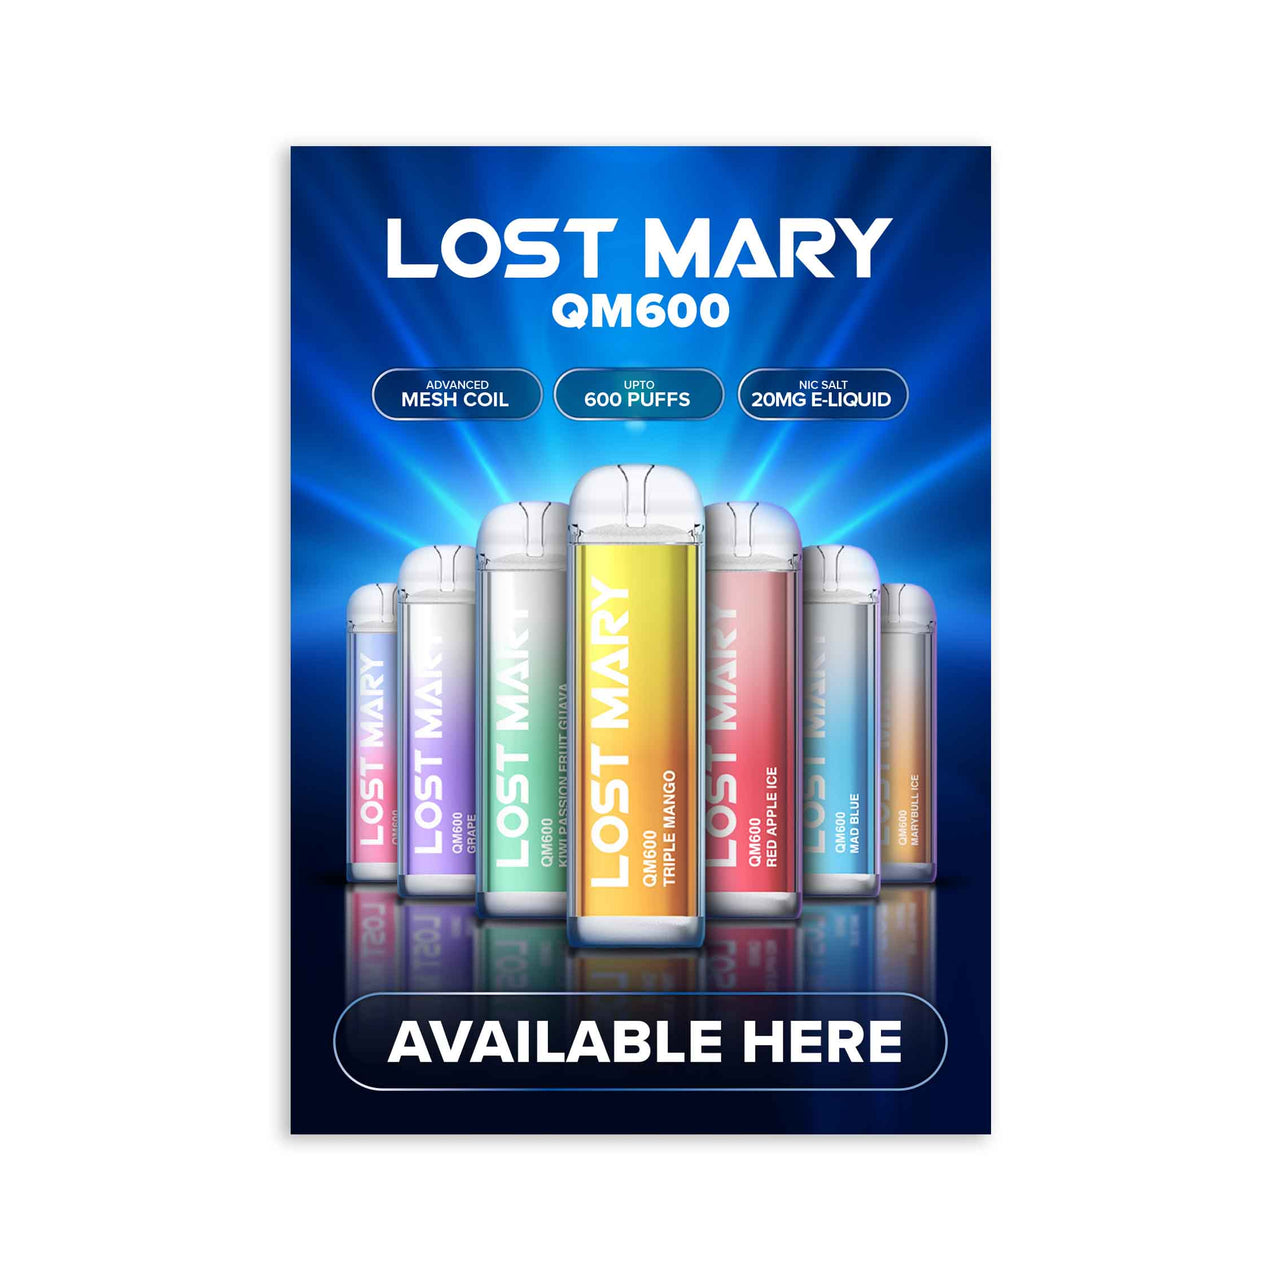 Lost Mary QM600 - POS - Poster (Available Here)